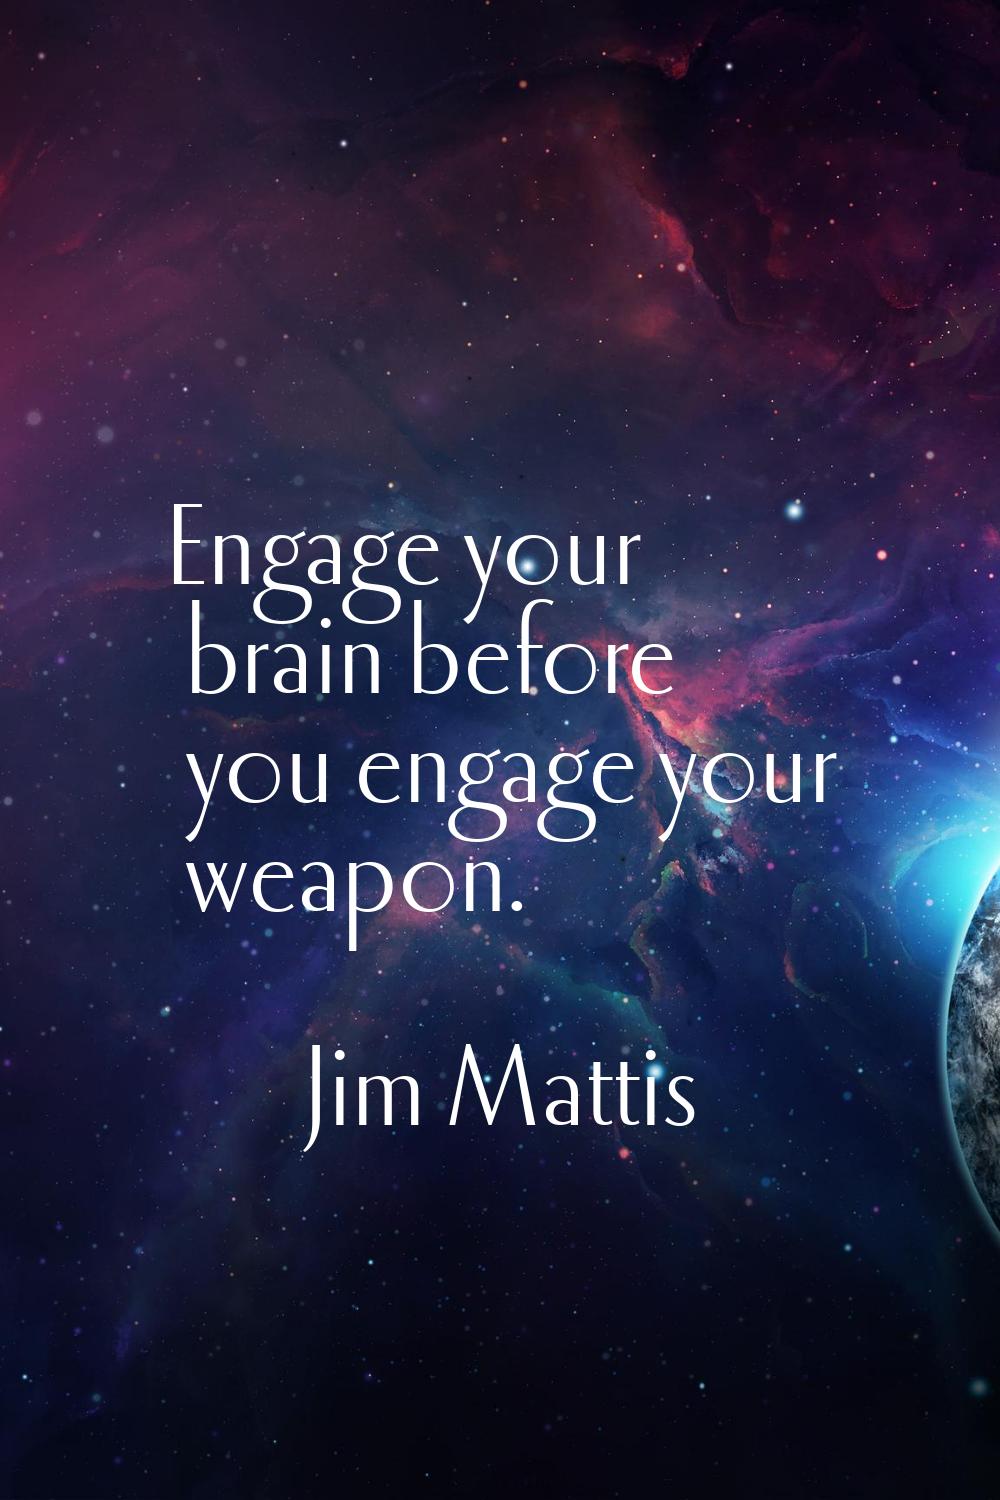 Engage your brain before you engage your weapon.